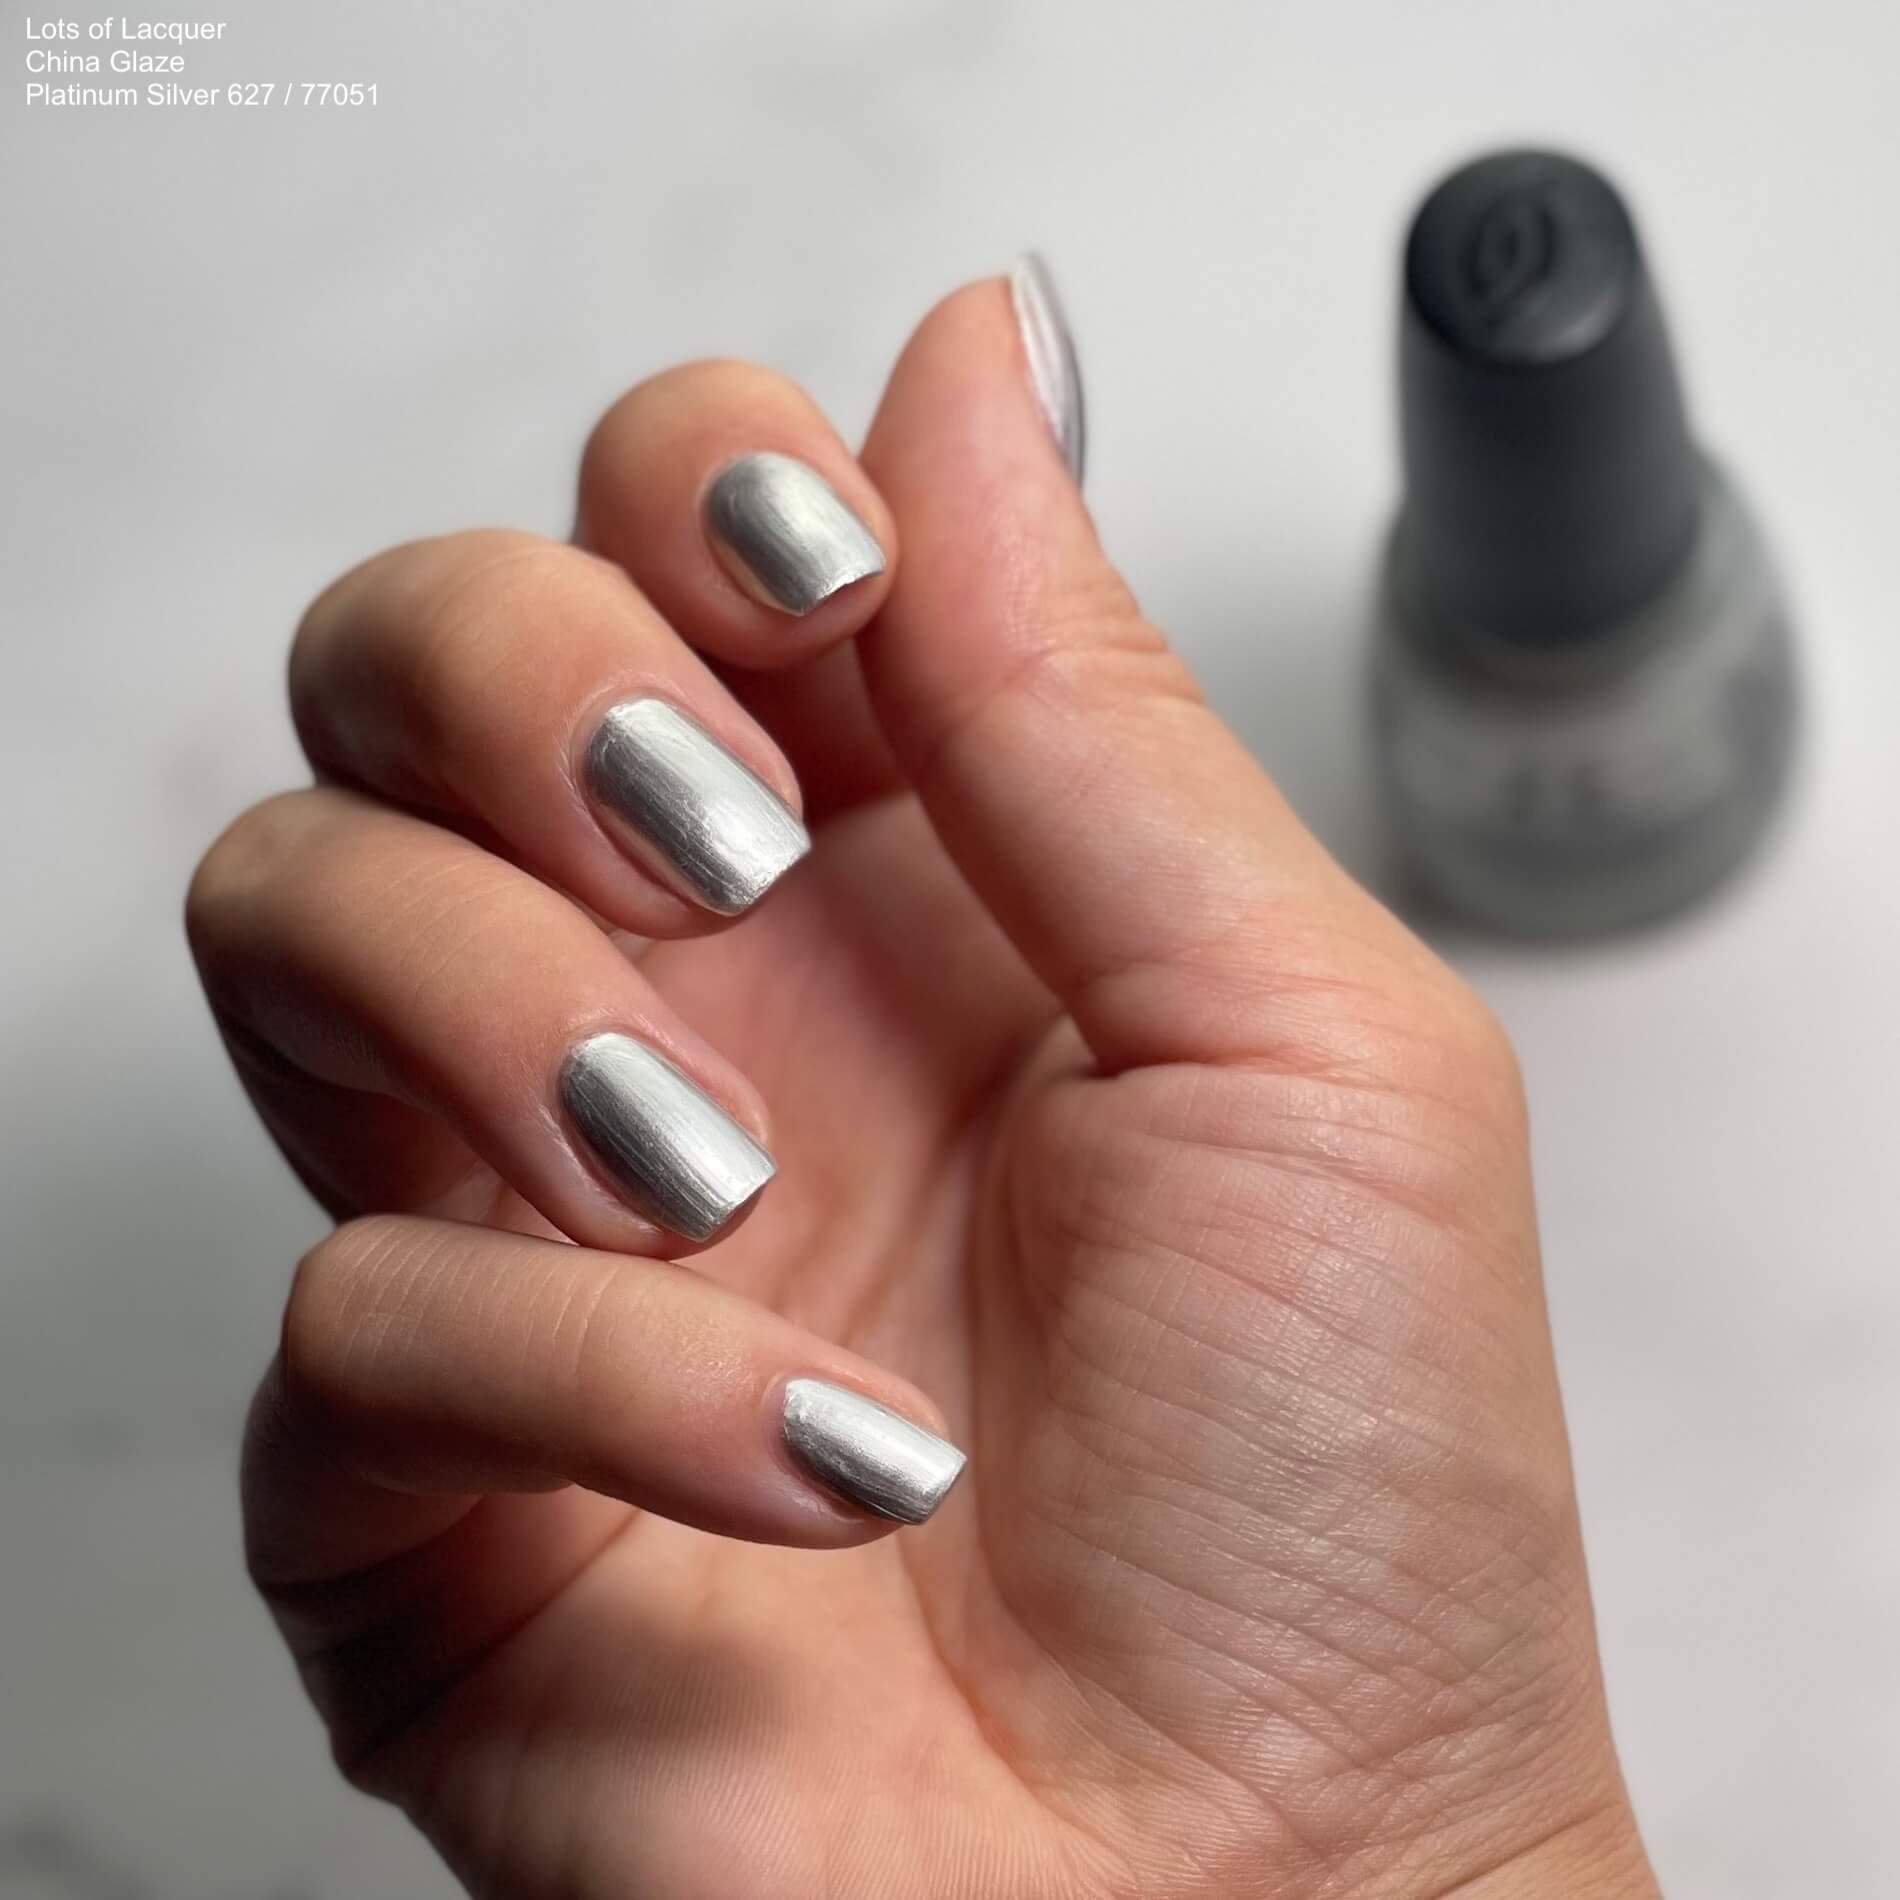 Silver Metallic Nail Lots of Lacquer